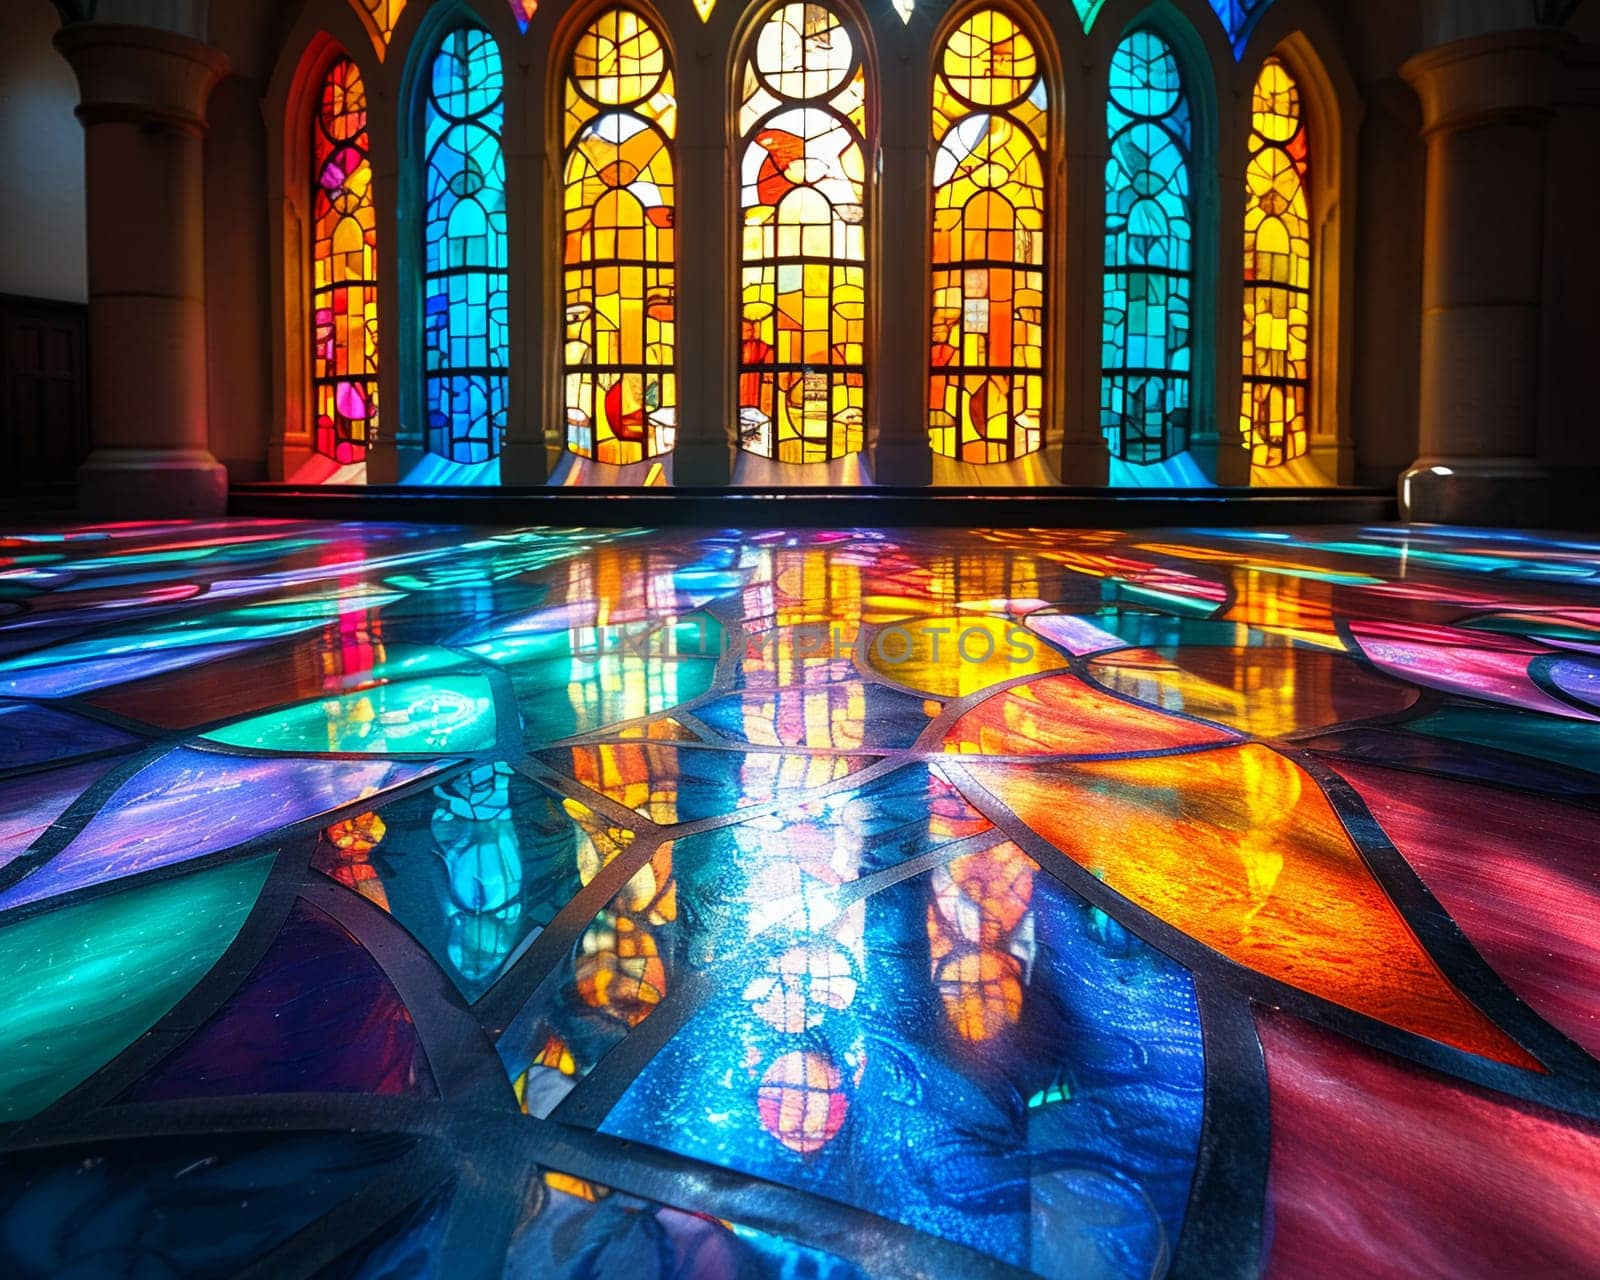 Stained Glass Window Casting Colored Light on a Church Floor The vibrant hues blend and blur by Benzoix